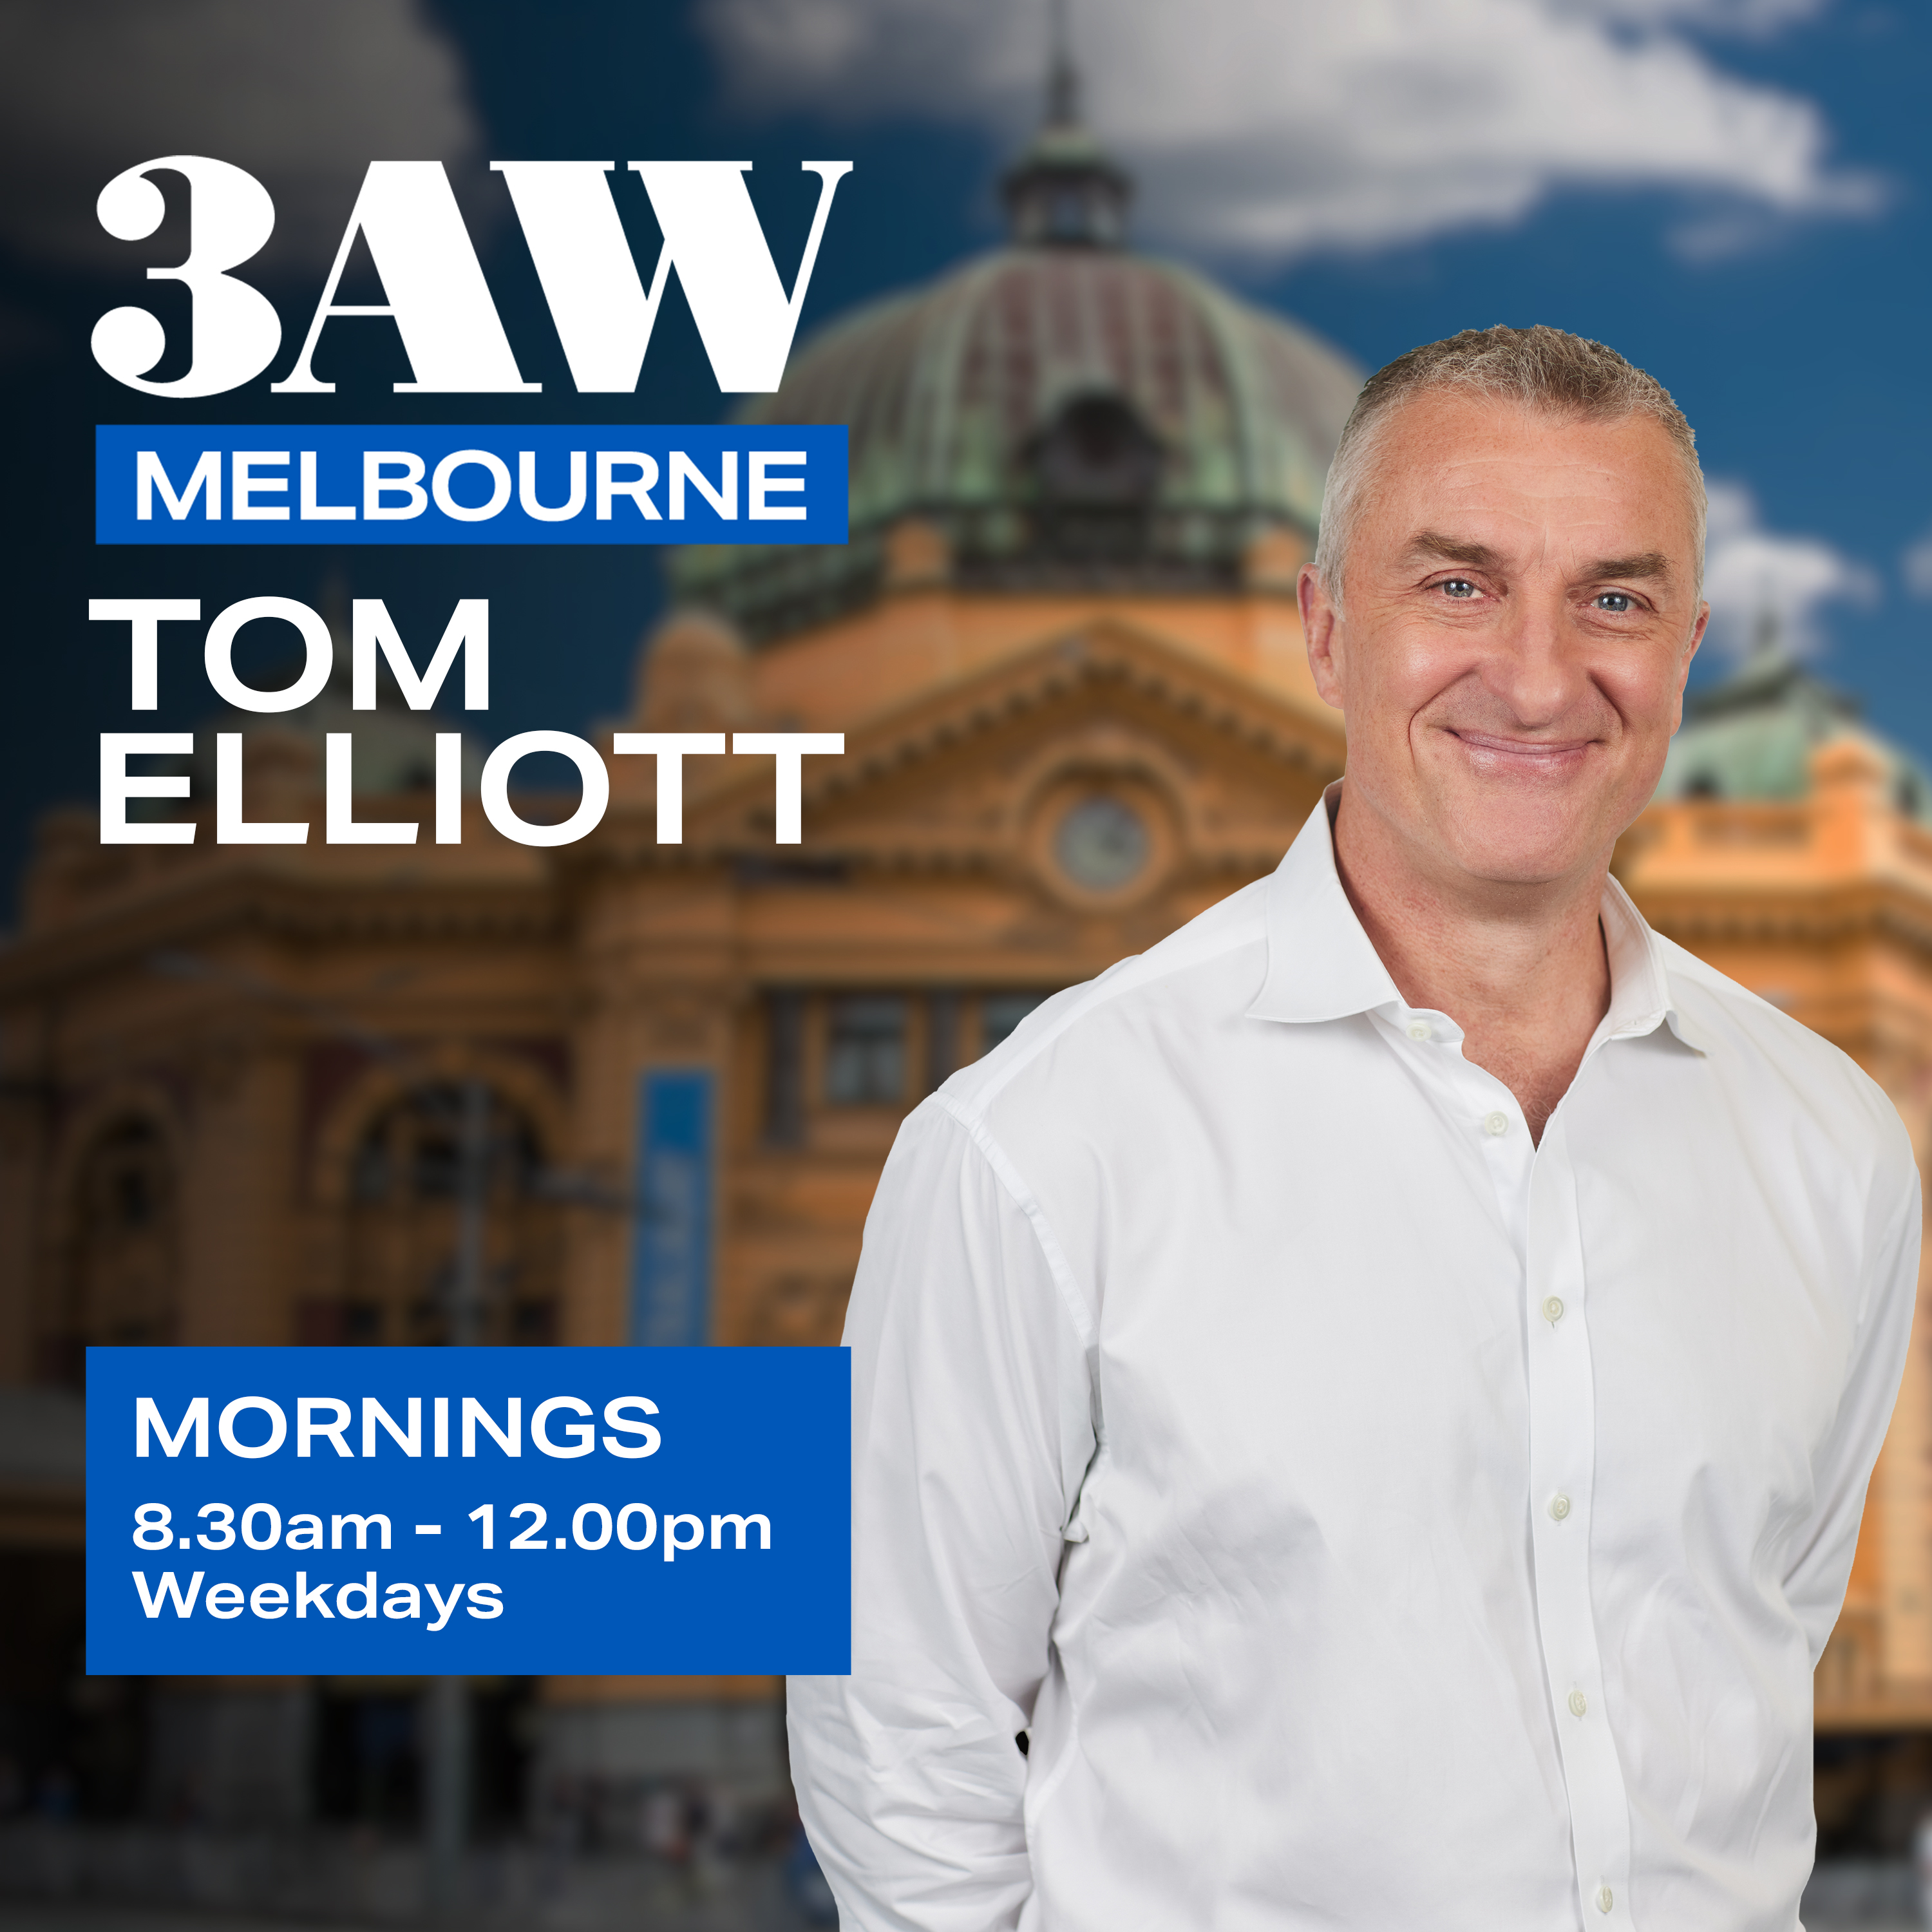 The social issue Tom Elliott says the AFL has a 'massive blind spot' about